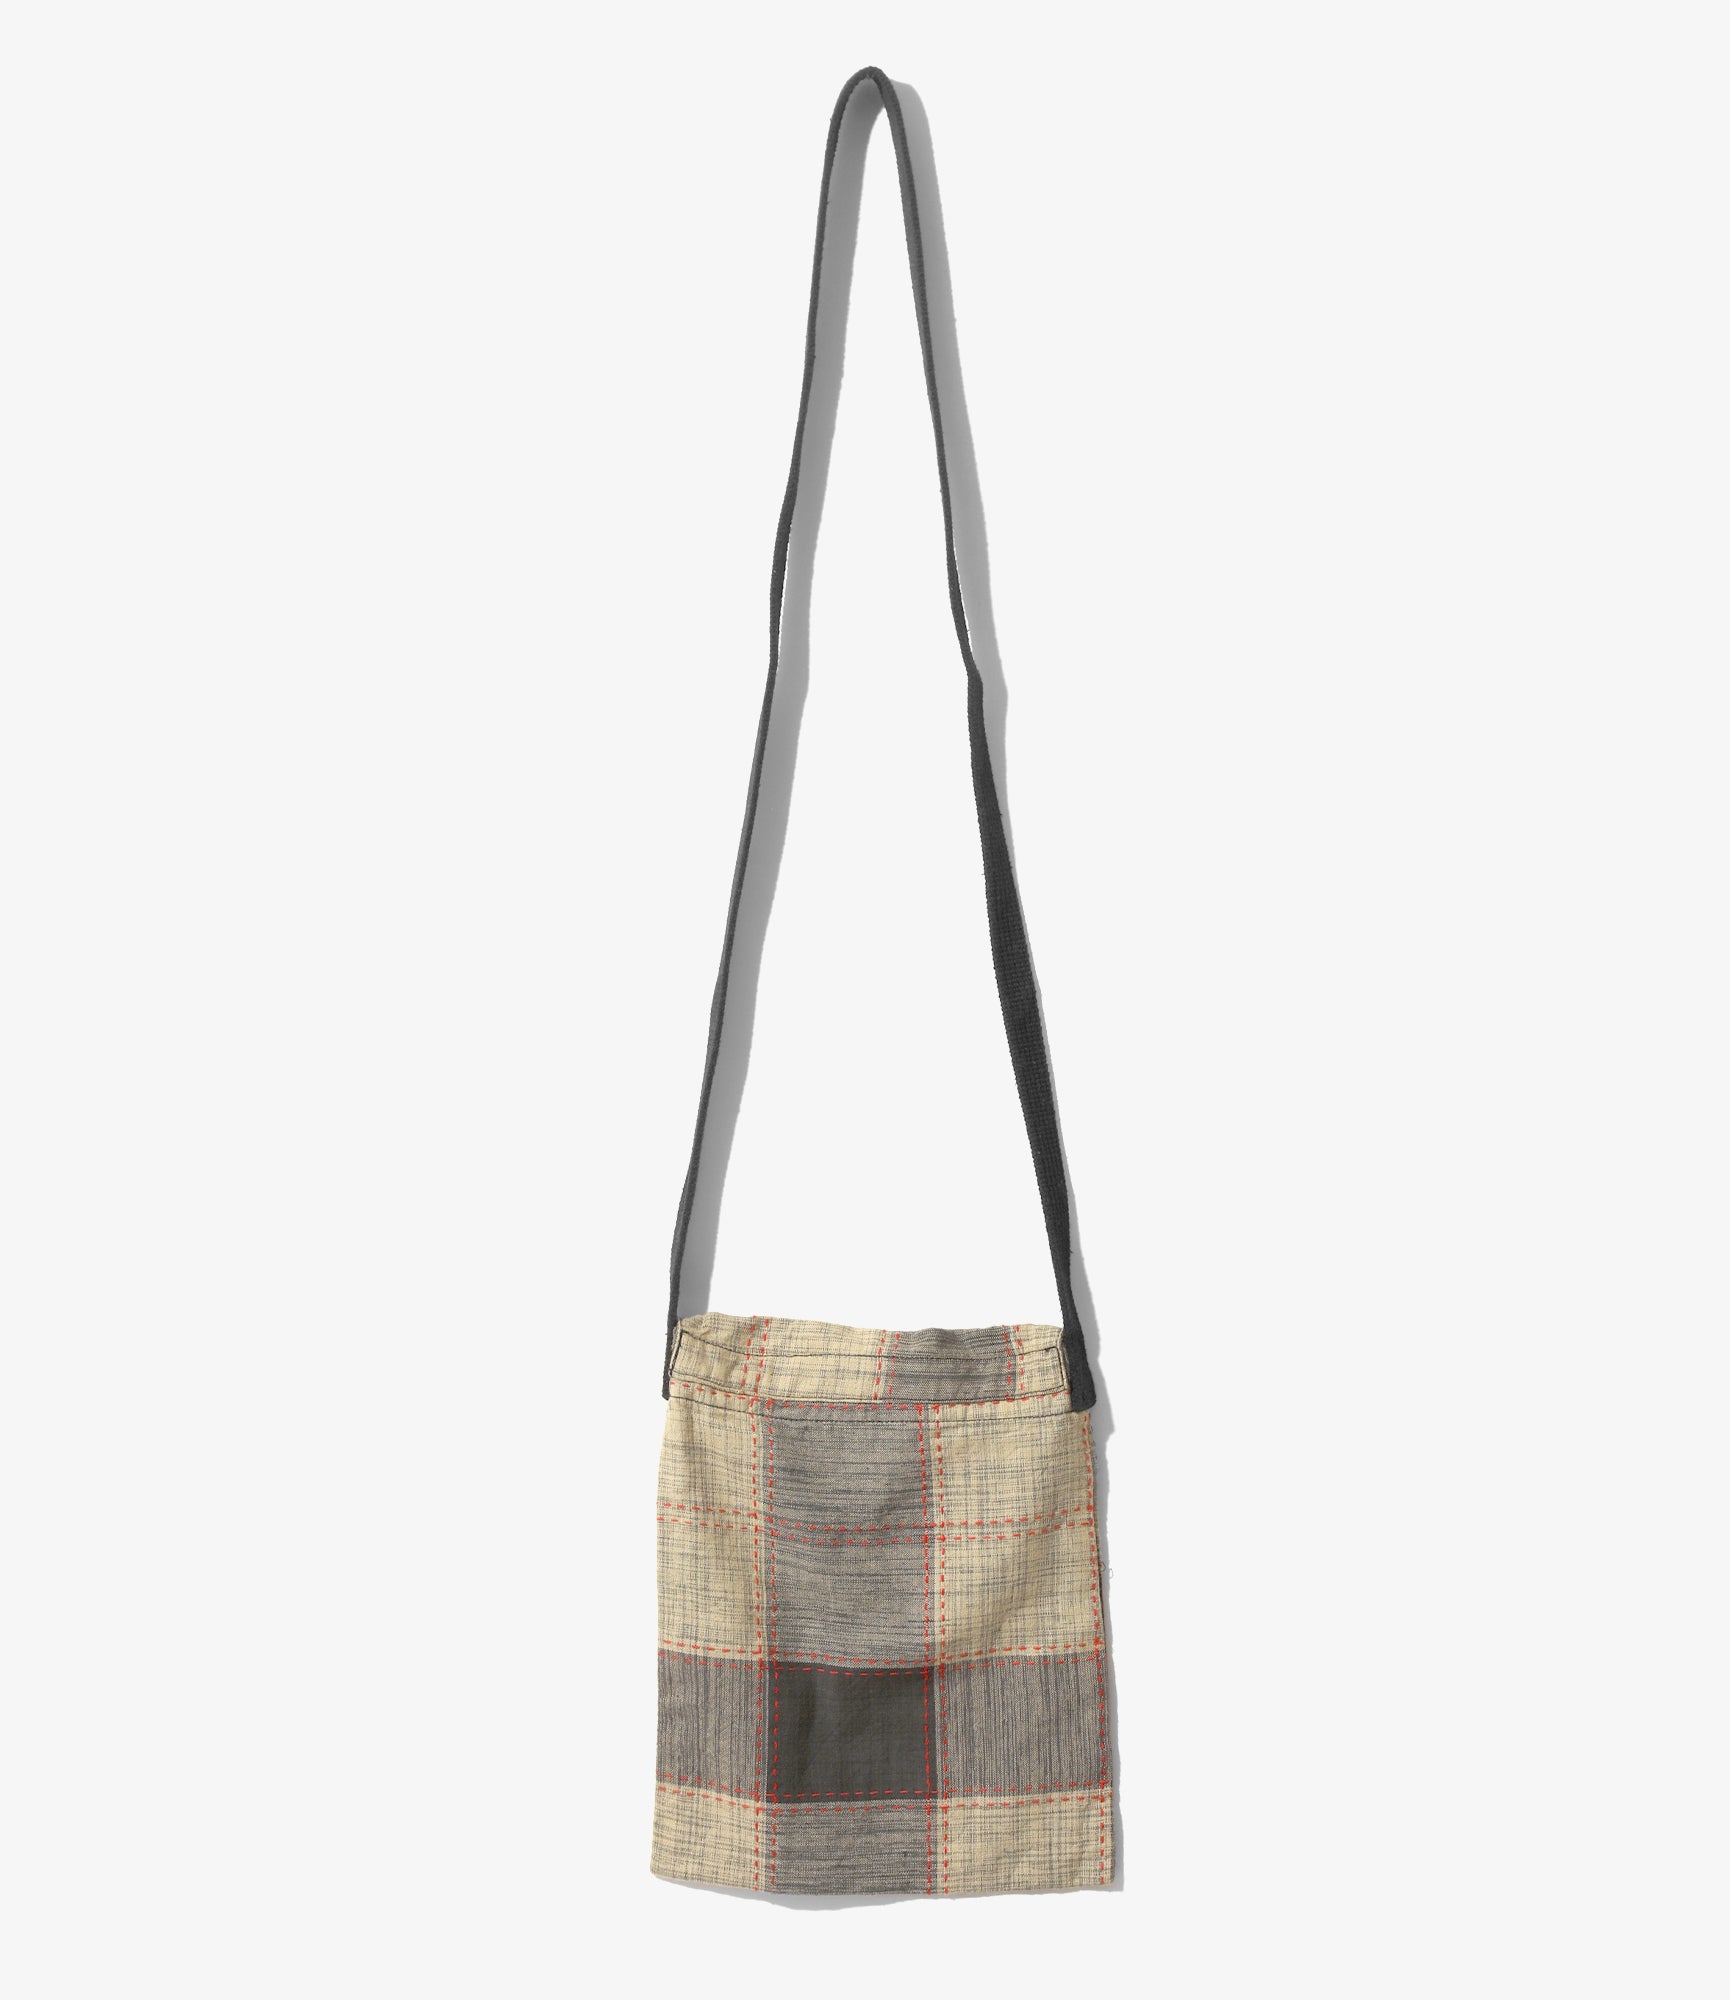 South2 West8 String Bag - Cotton Stitched Plaid - Red Stitch